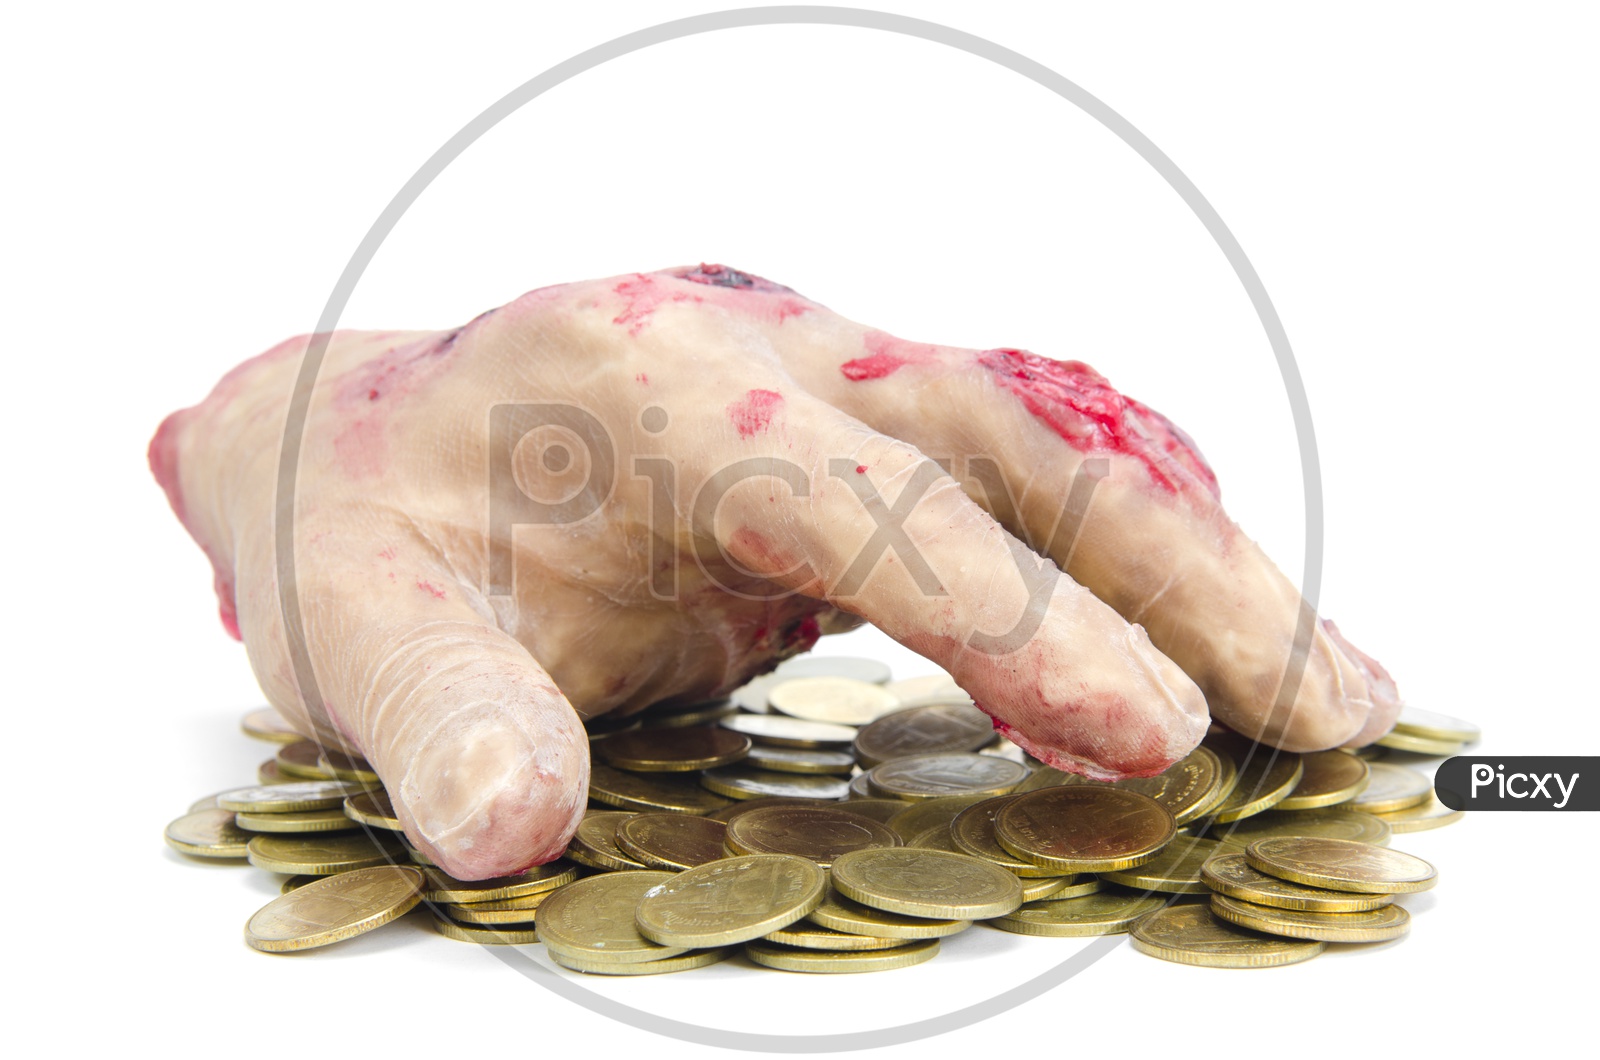 Human hand with coins